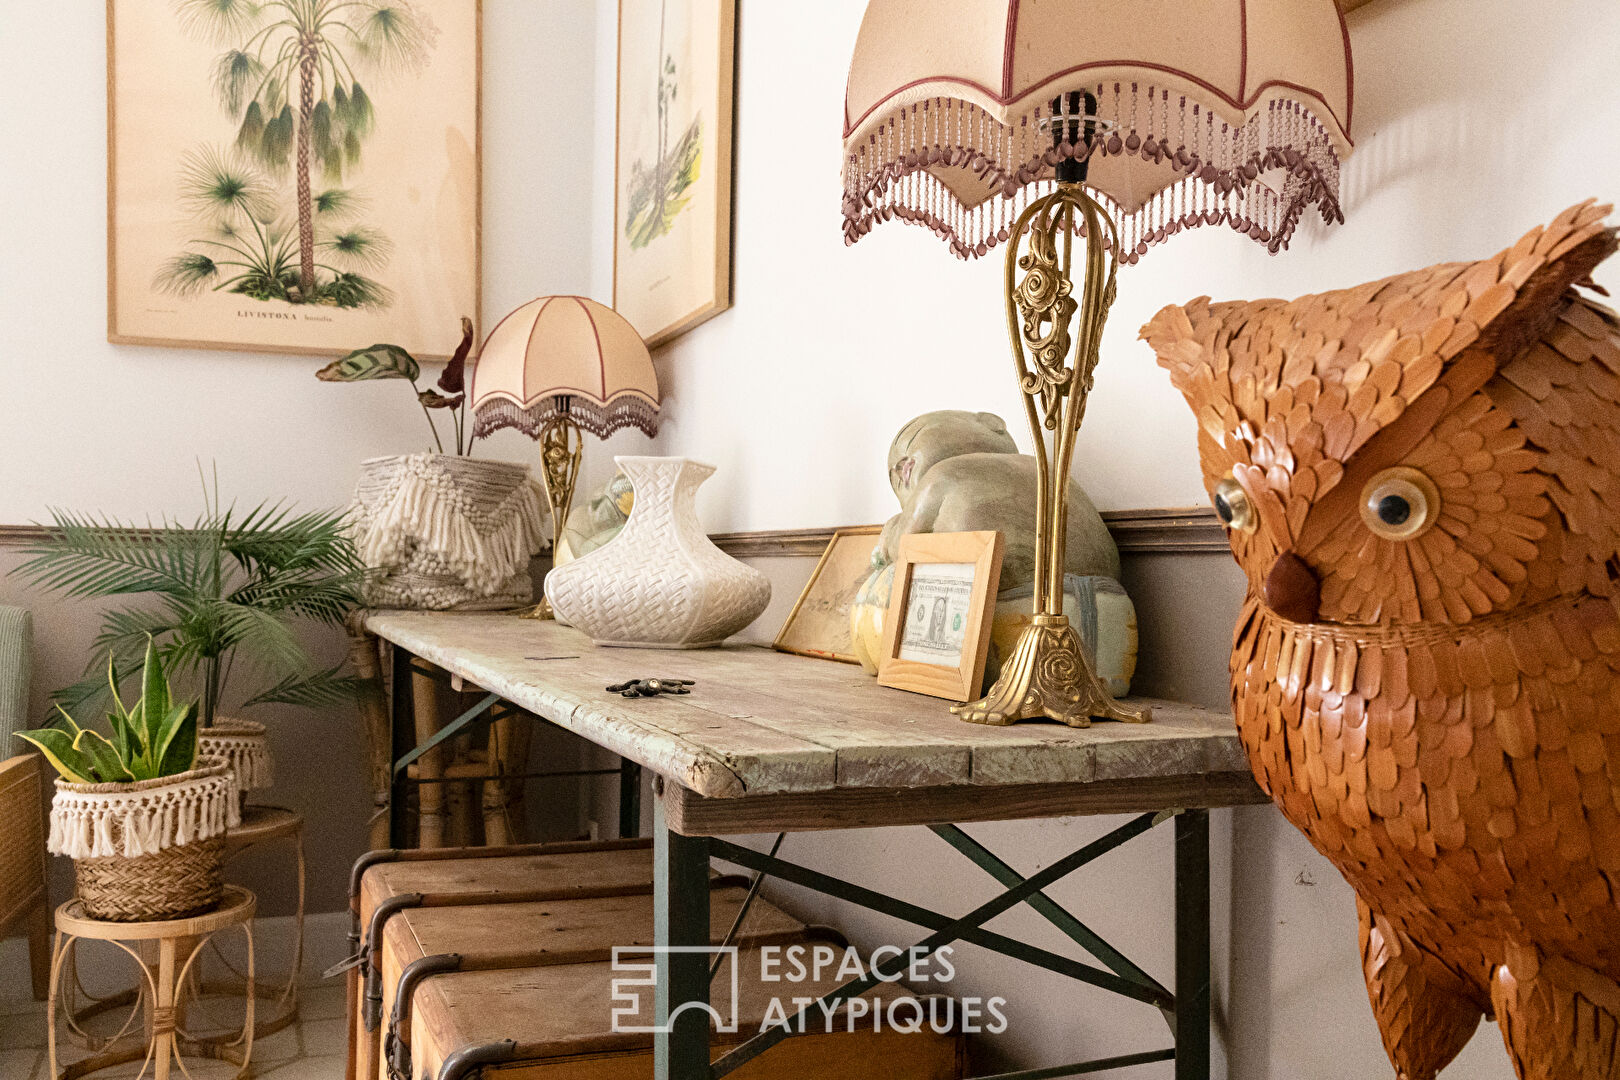 Provence revived in a Bohemian Chic version…